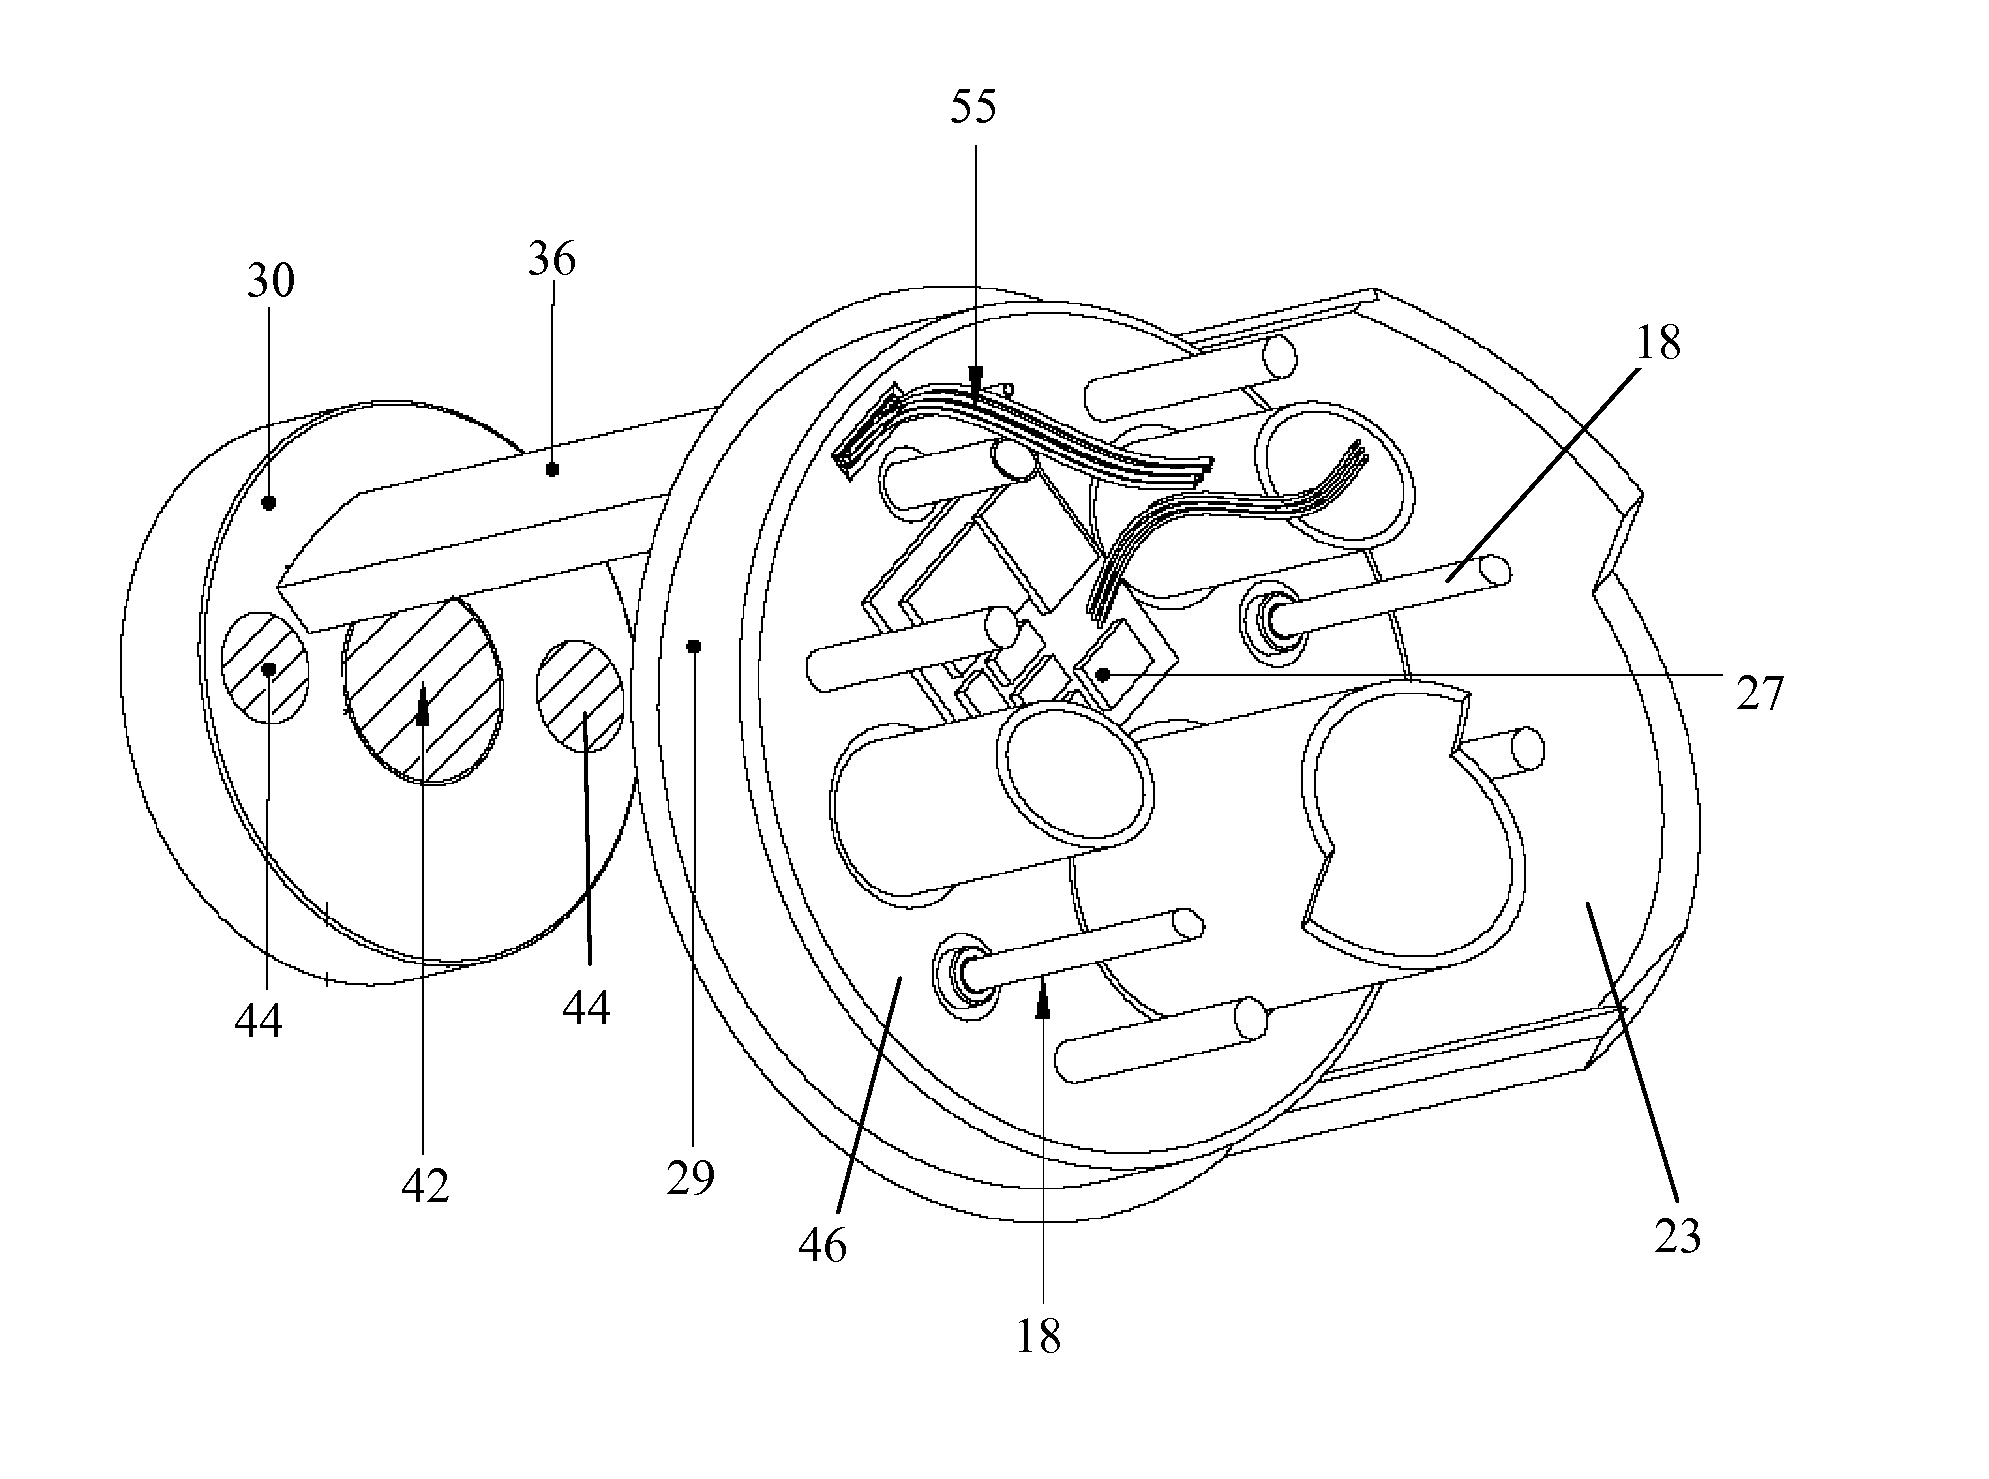 Endoscope assembly with retroscope